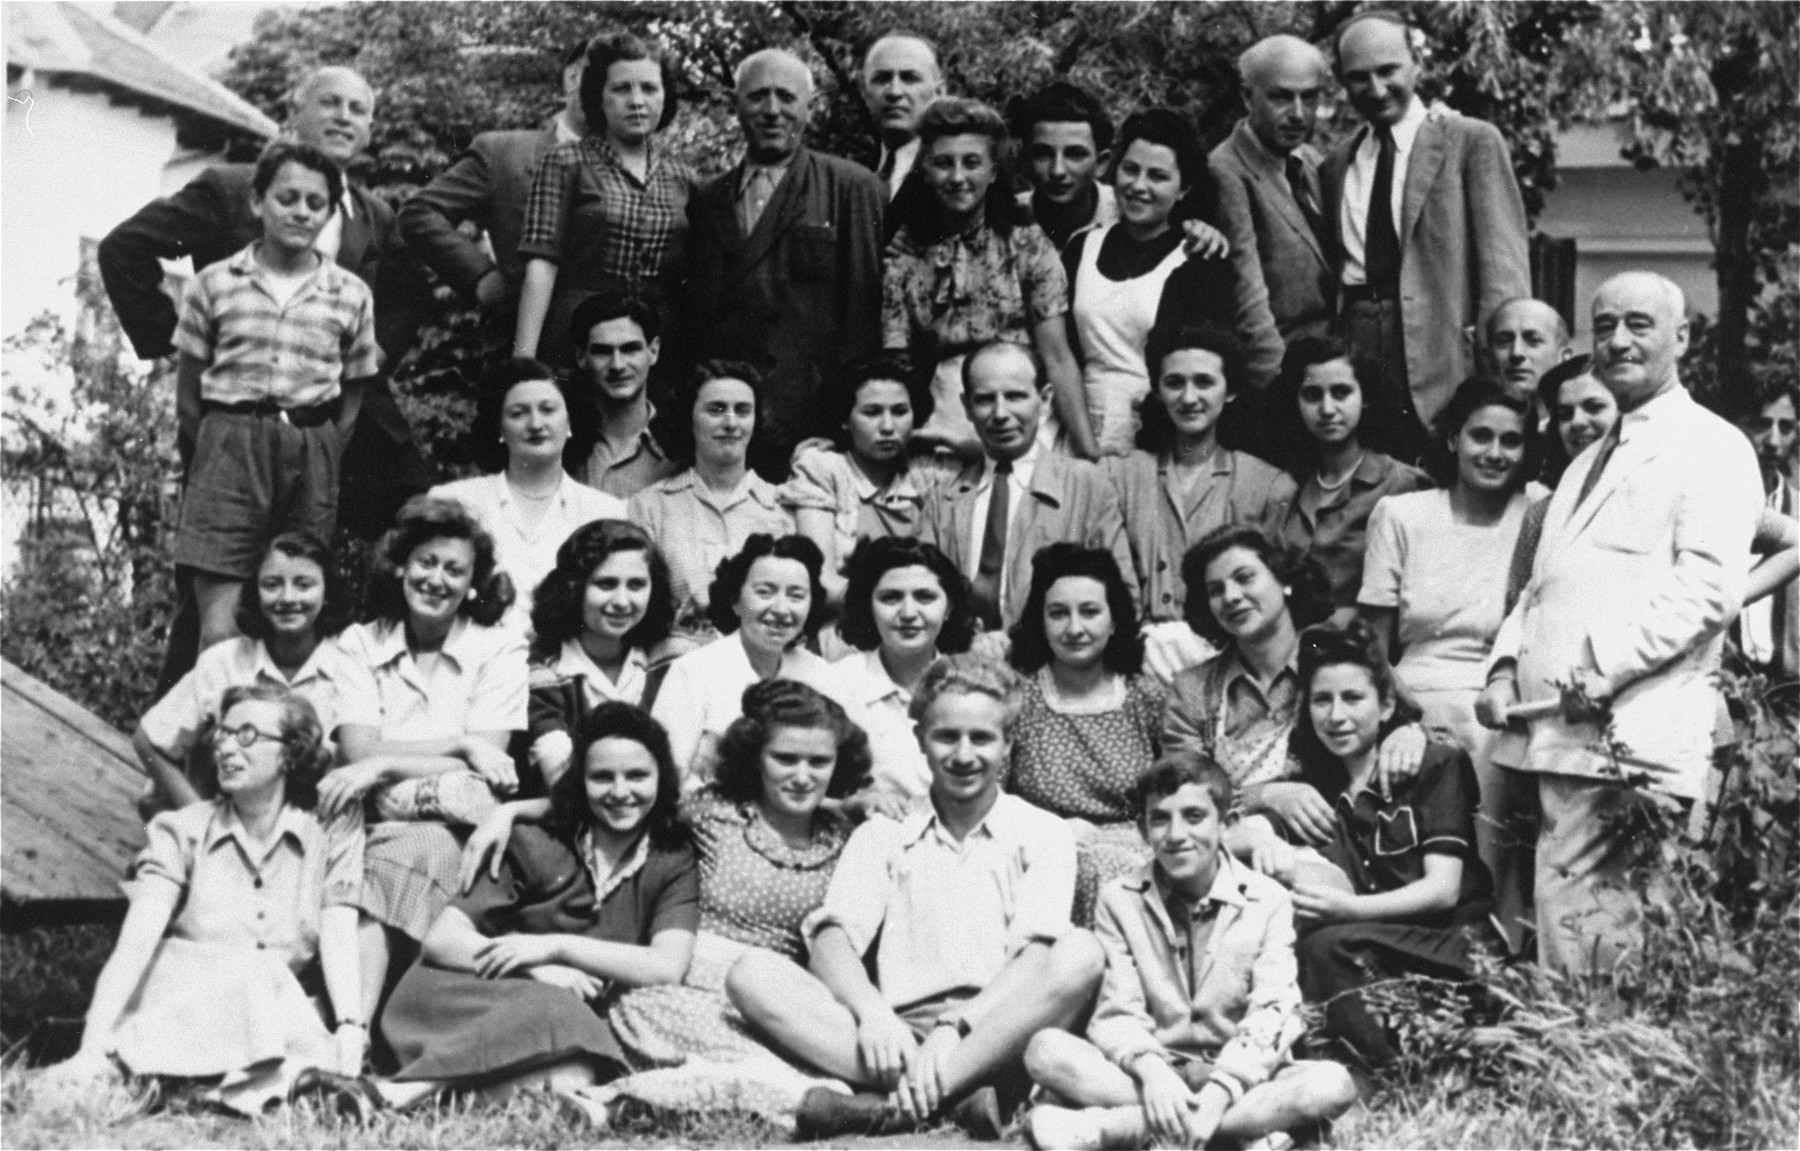 Group portrait of Jewish students attending a book-binding course in Bacau, Romania. 

Among those pictured is Jeanine Gutman (second row, third from the right).  This school was one of many organized by the Jewish community after Jewish youth were excluded from the Romanian school system.